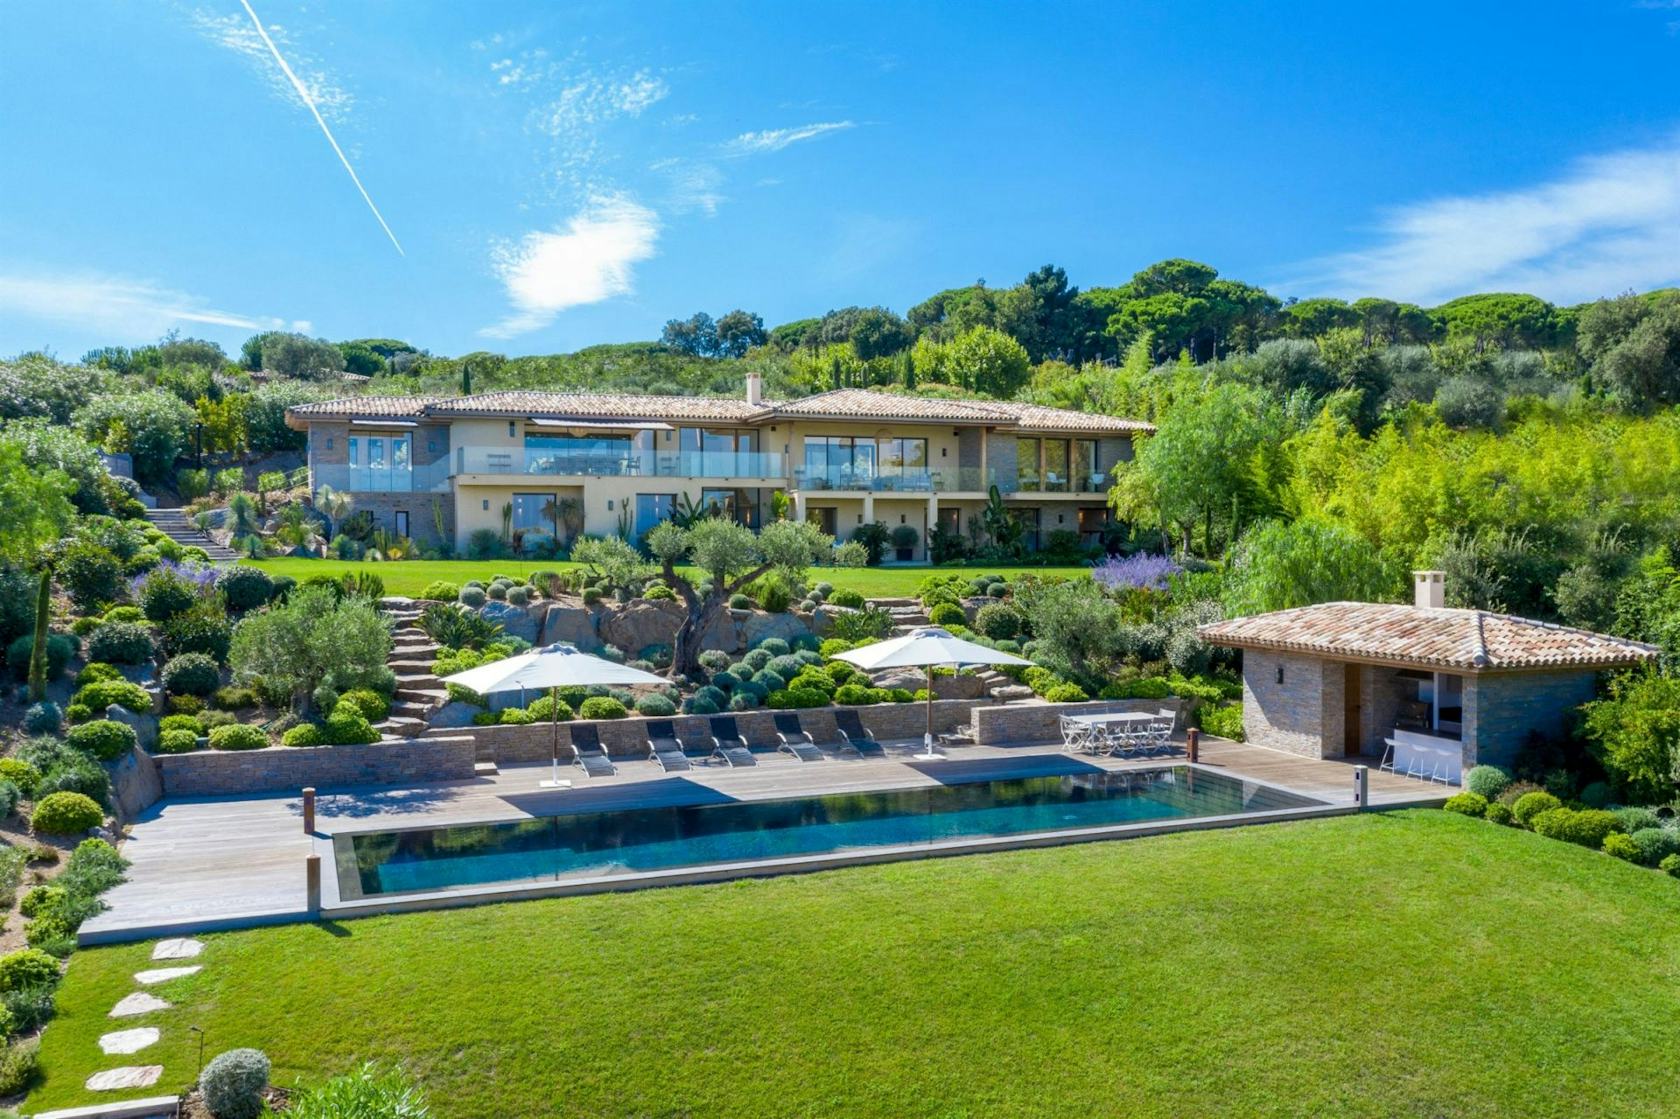 3 reasons to invest in property in Saint-Tropez 